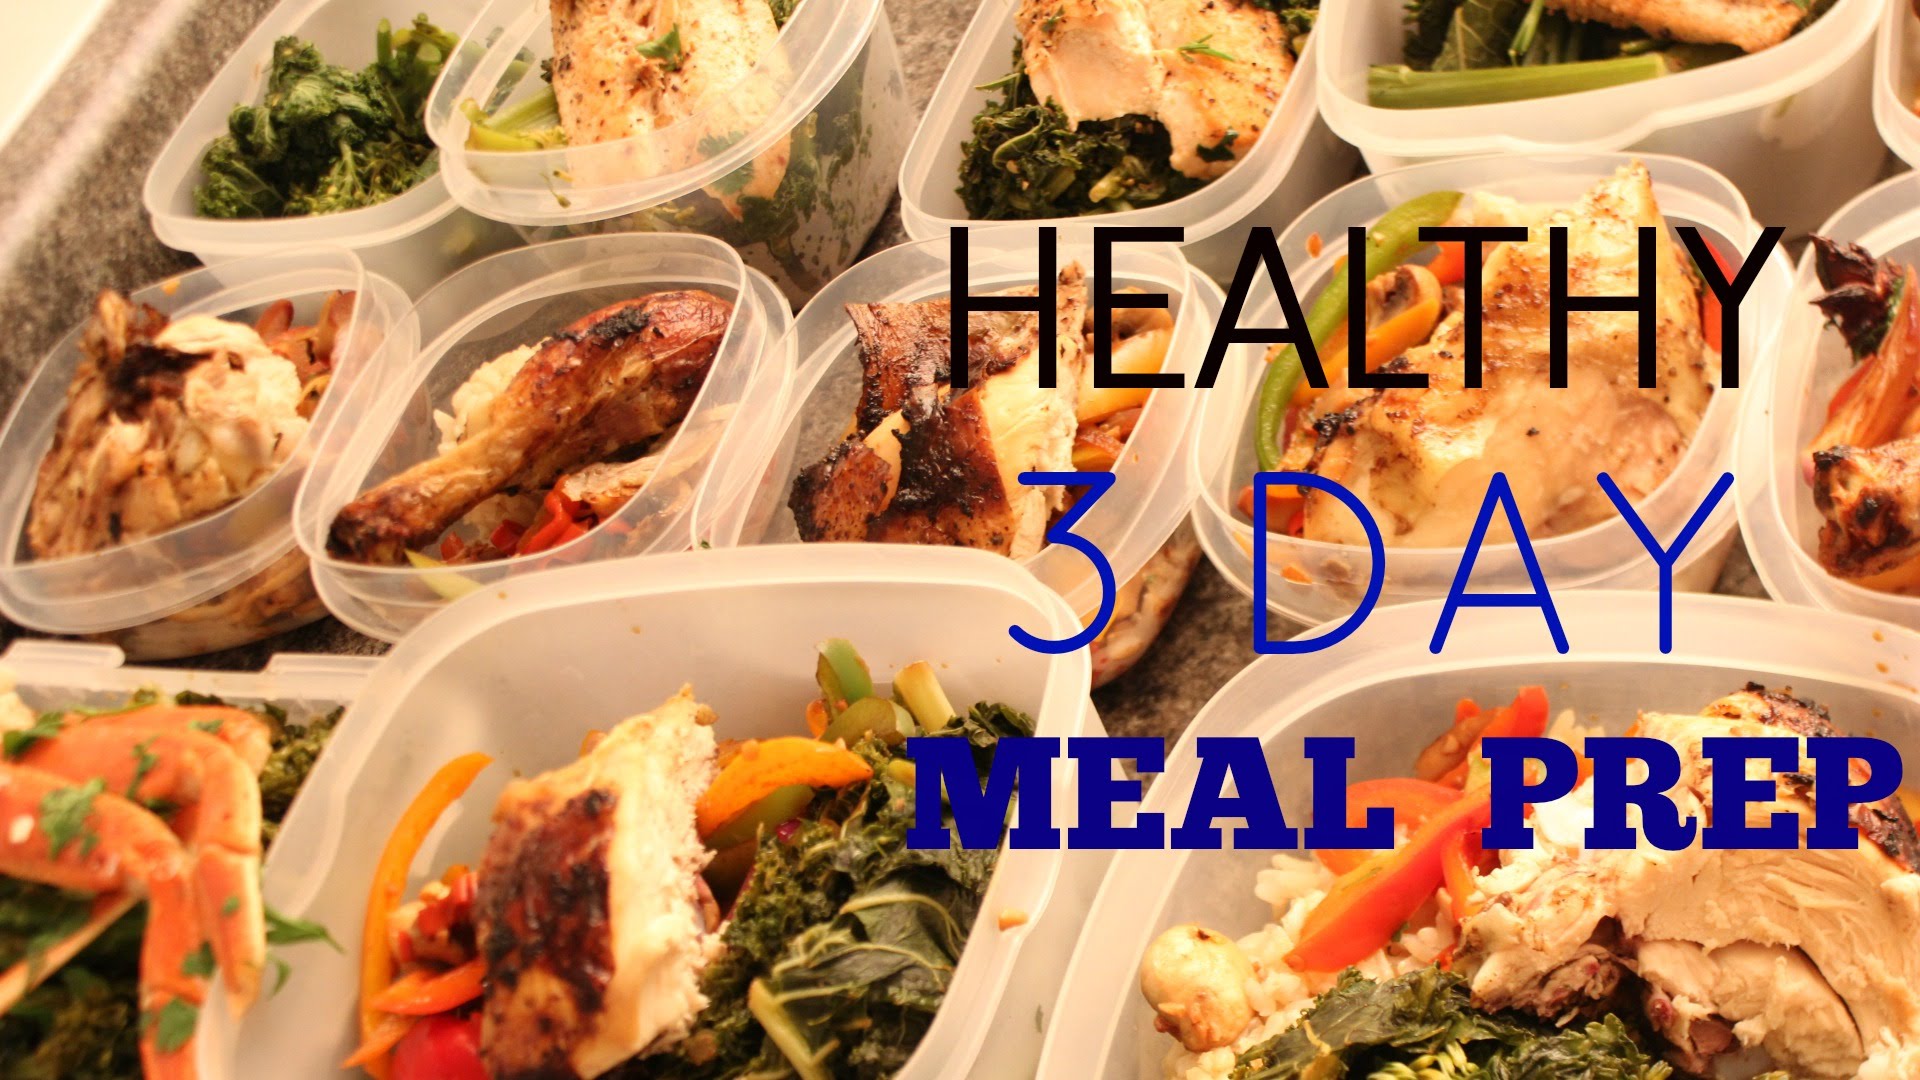 Healthy Chicken and Seafood Meal Prep - YouTube